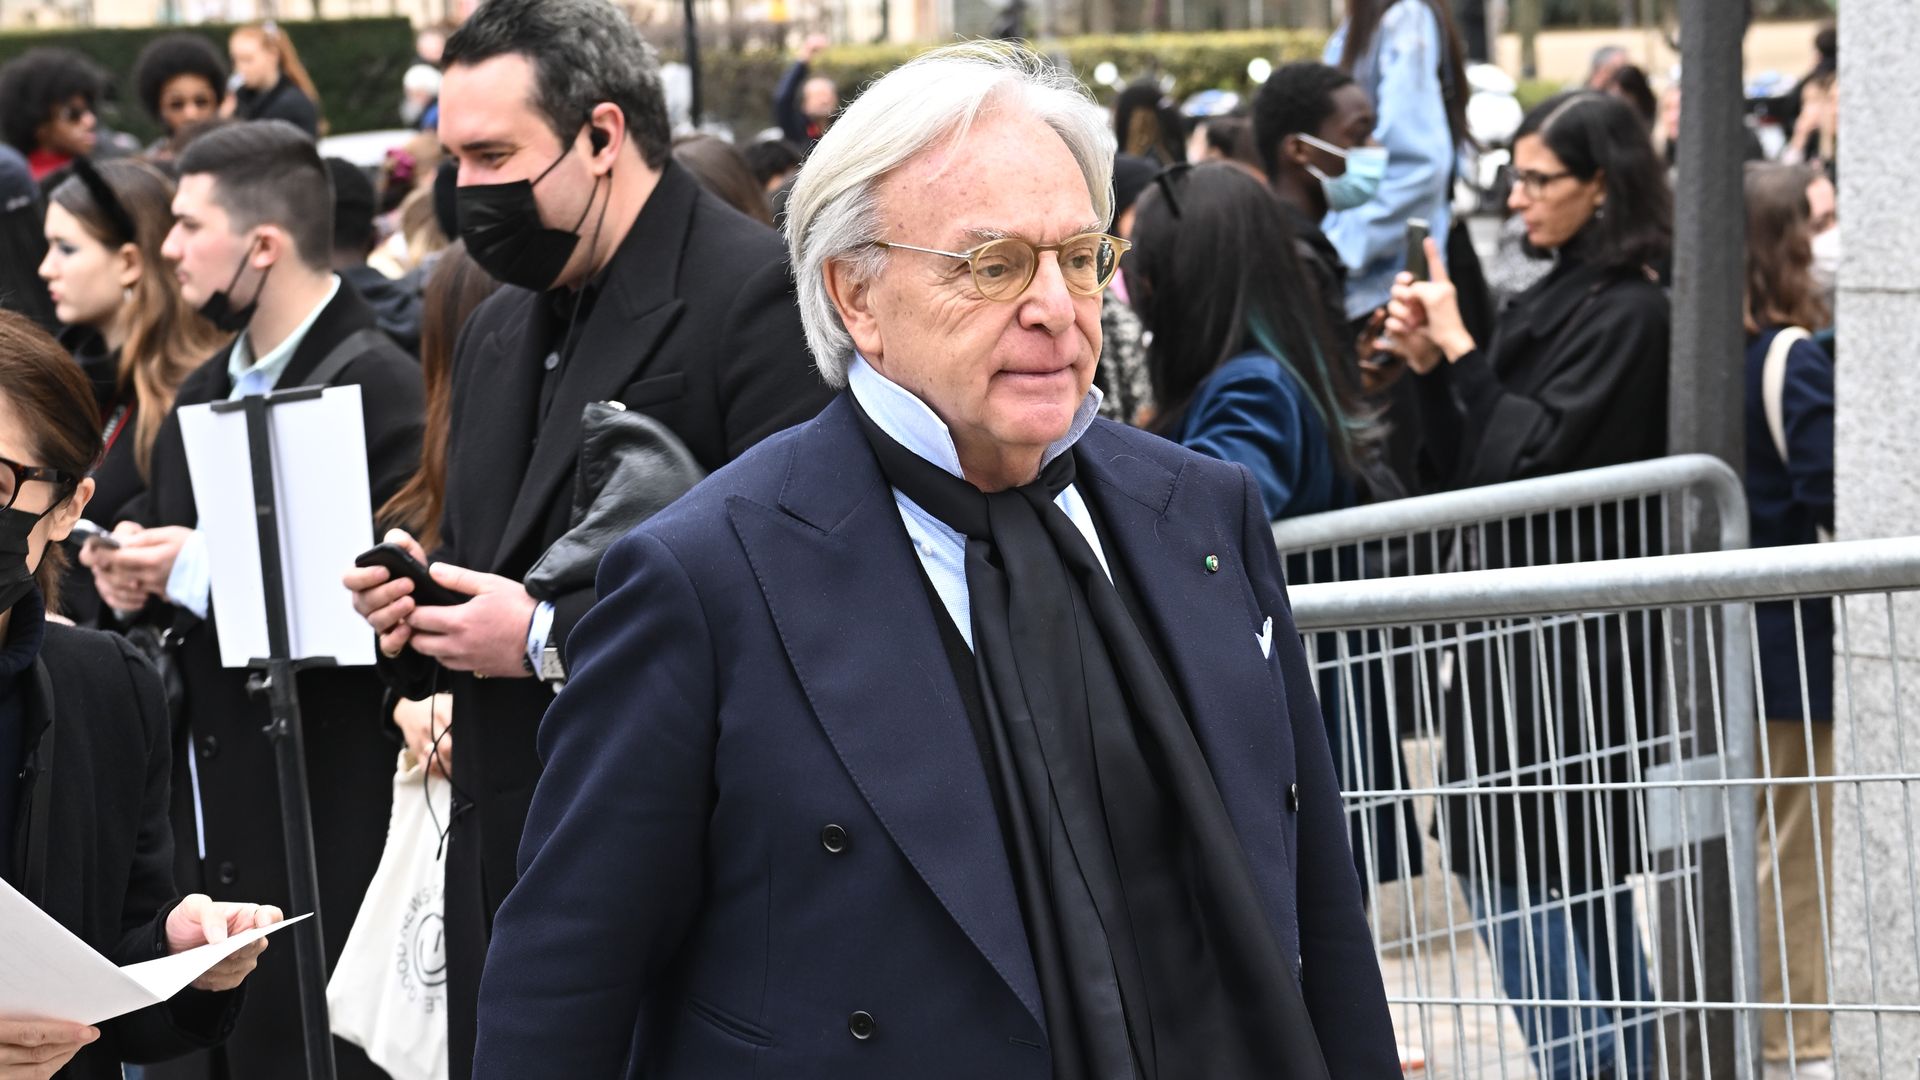 Diego Della Valle, the CEO of luxury brand Tod's, wears a dark coat at a fashion show in Paris.